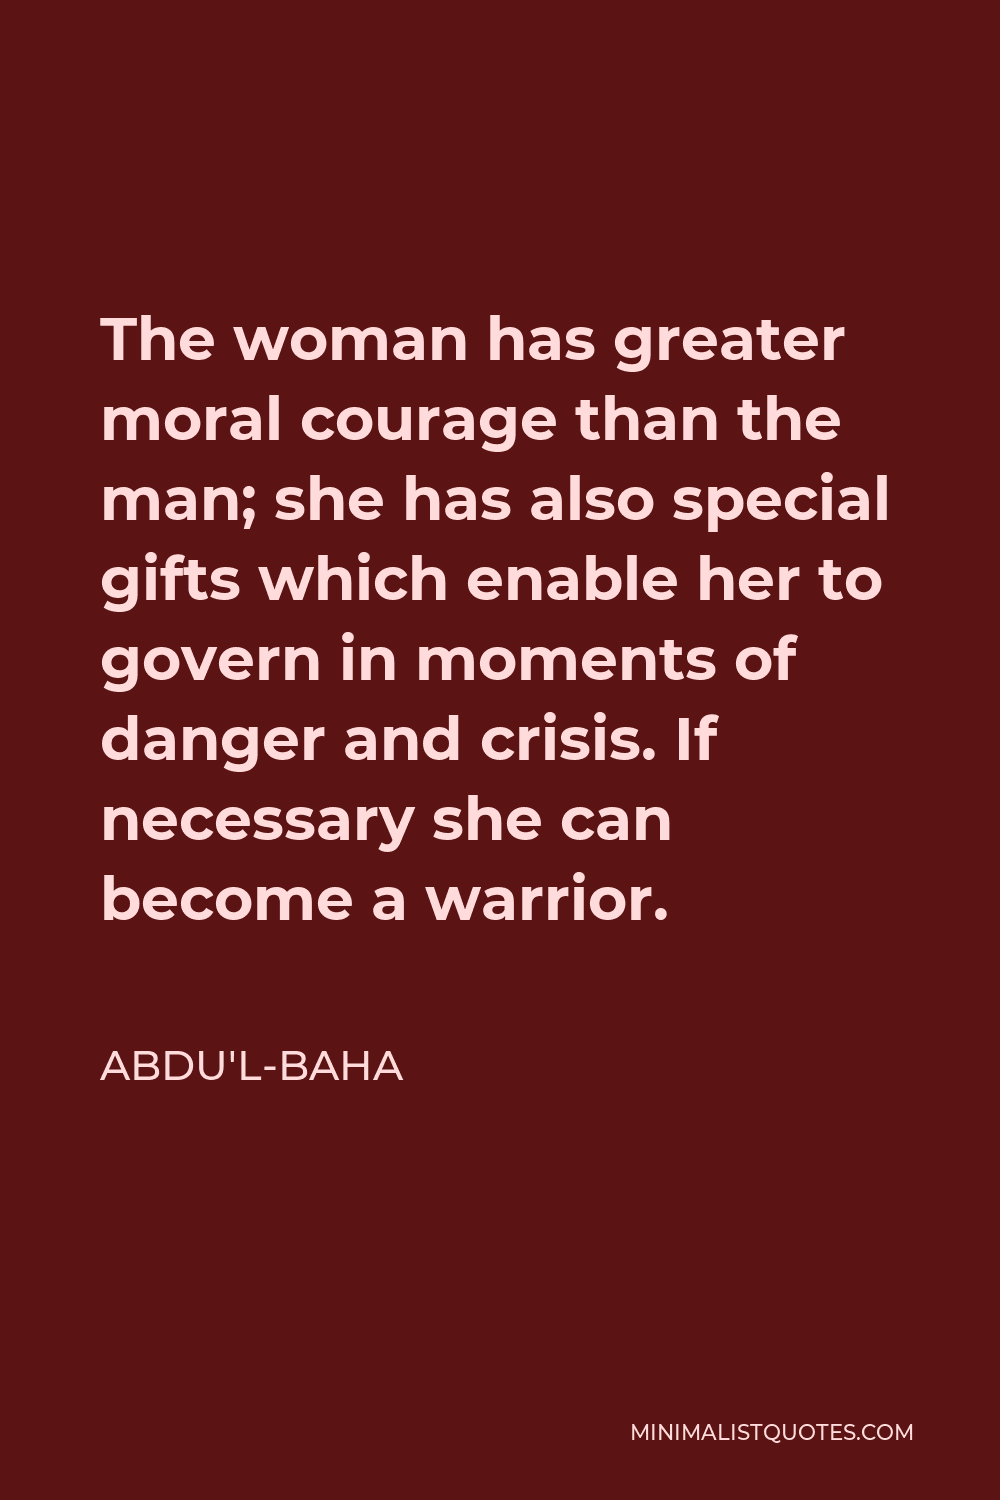 Abdu'l-Baha Quote - The woman has greater moral courage than the man; she has also special gifts which enable her to govern in moments of danger and crisis. If necessary she can become a warrior.